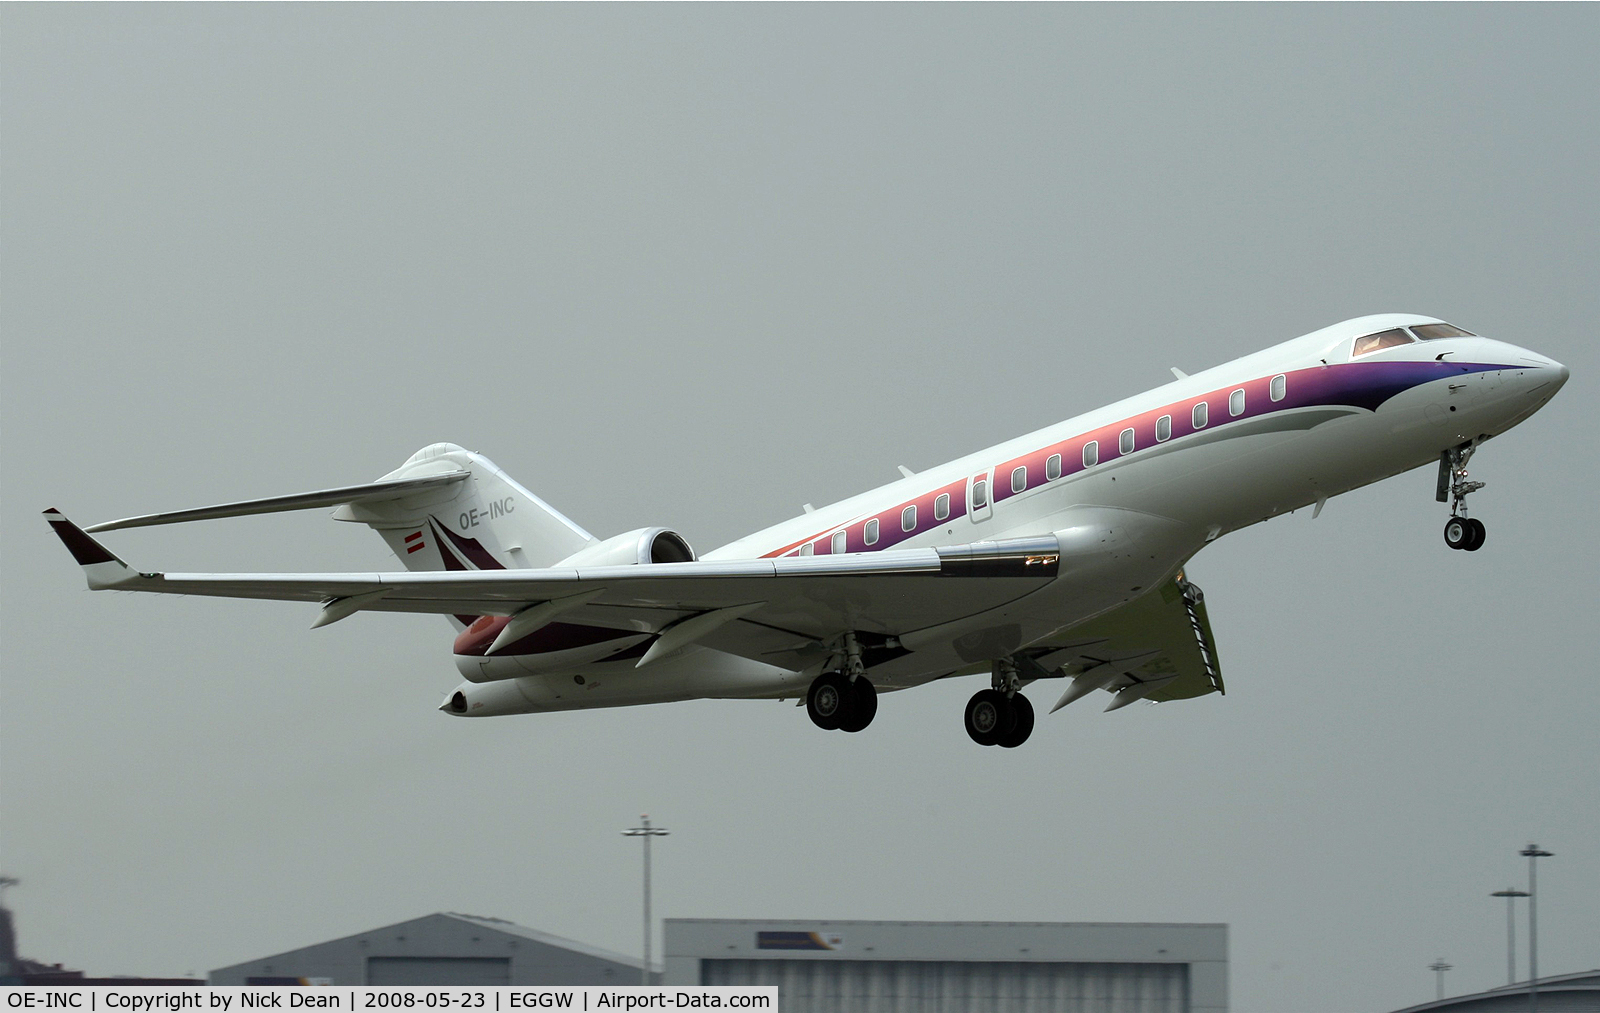 OE-INC, 2006 Bombardier BD-700-1A10 Global 5000 C/N 9168, EGGW (Stunning paint on this one) C/N is actually 9168